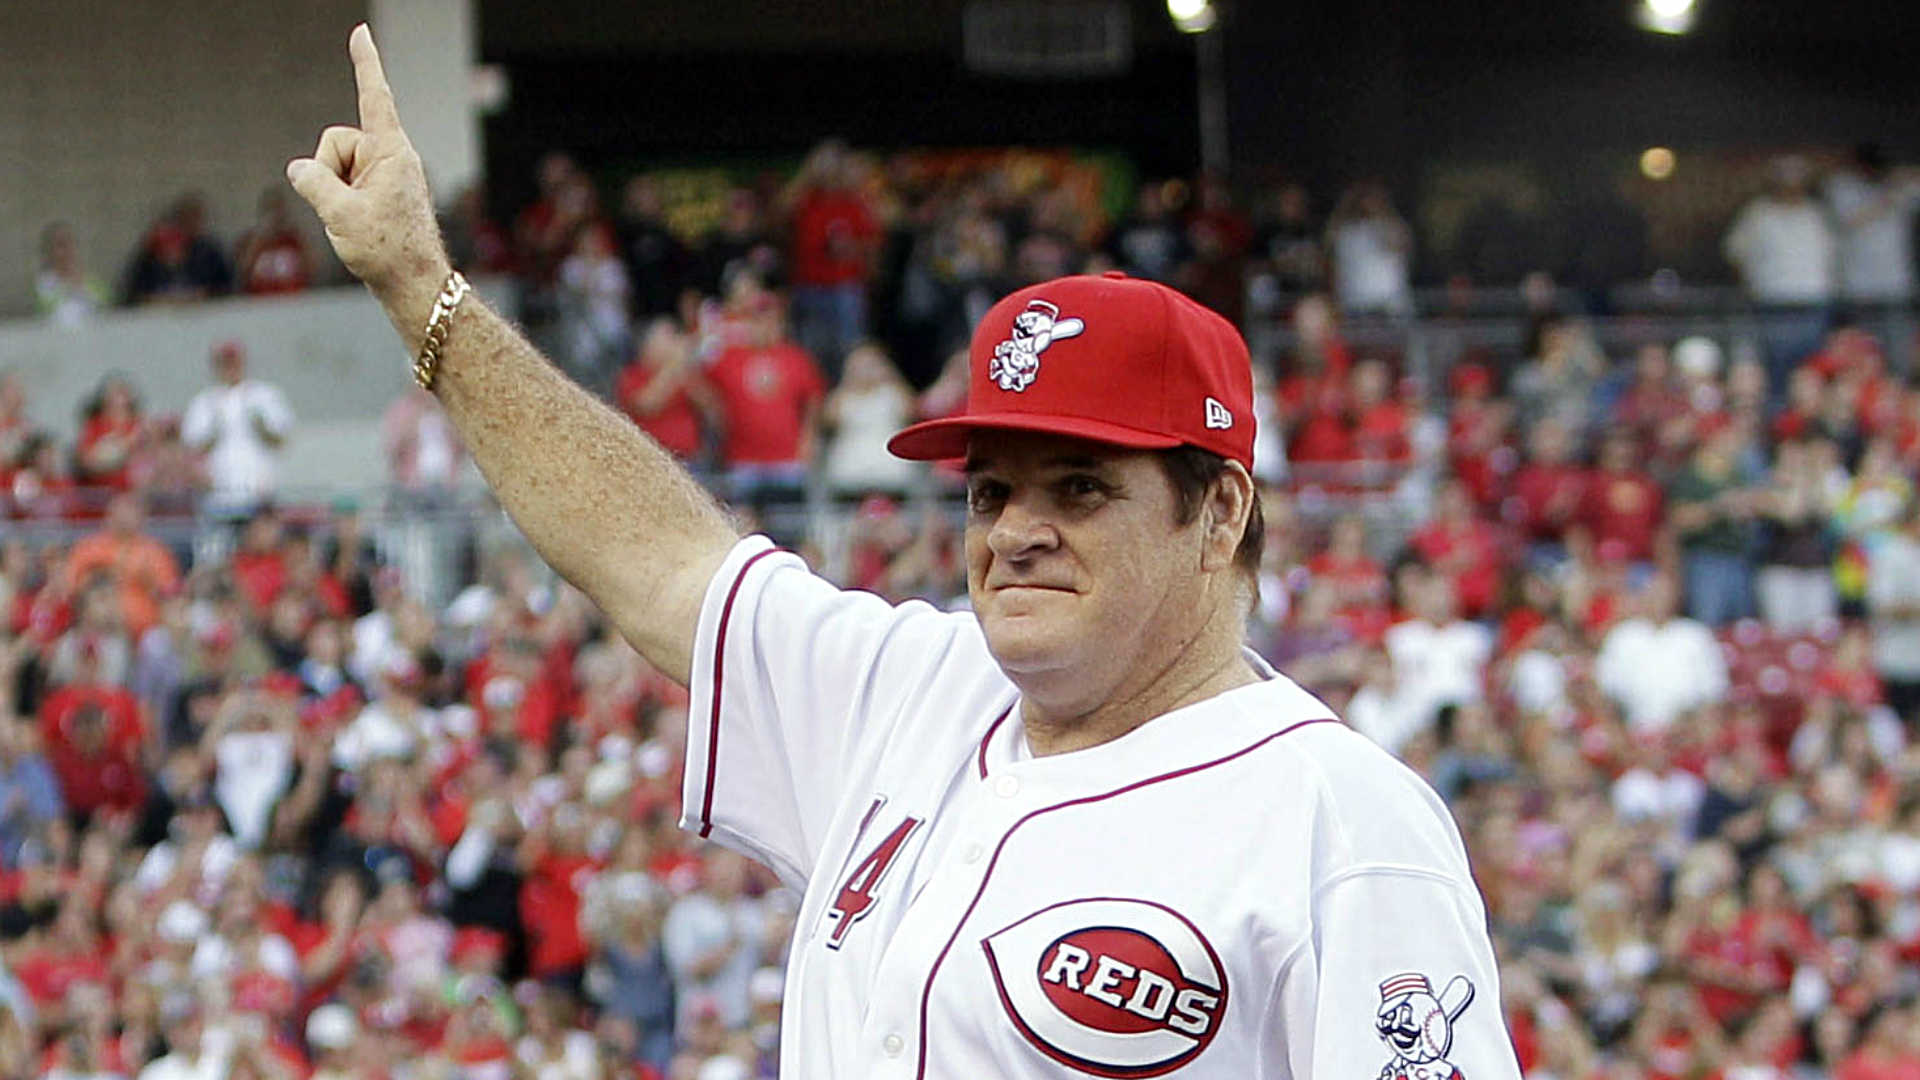 Pete Rose cheered by Reds fans at All-Star Game introduction | MLB | Sporting News